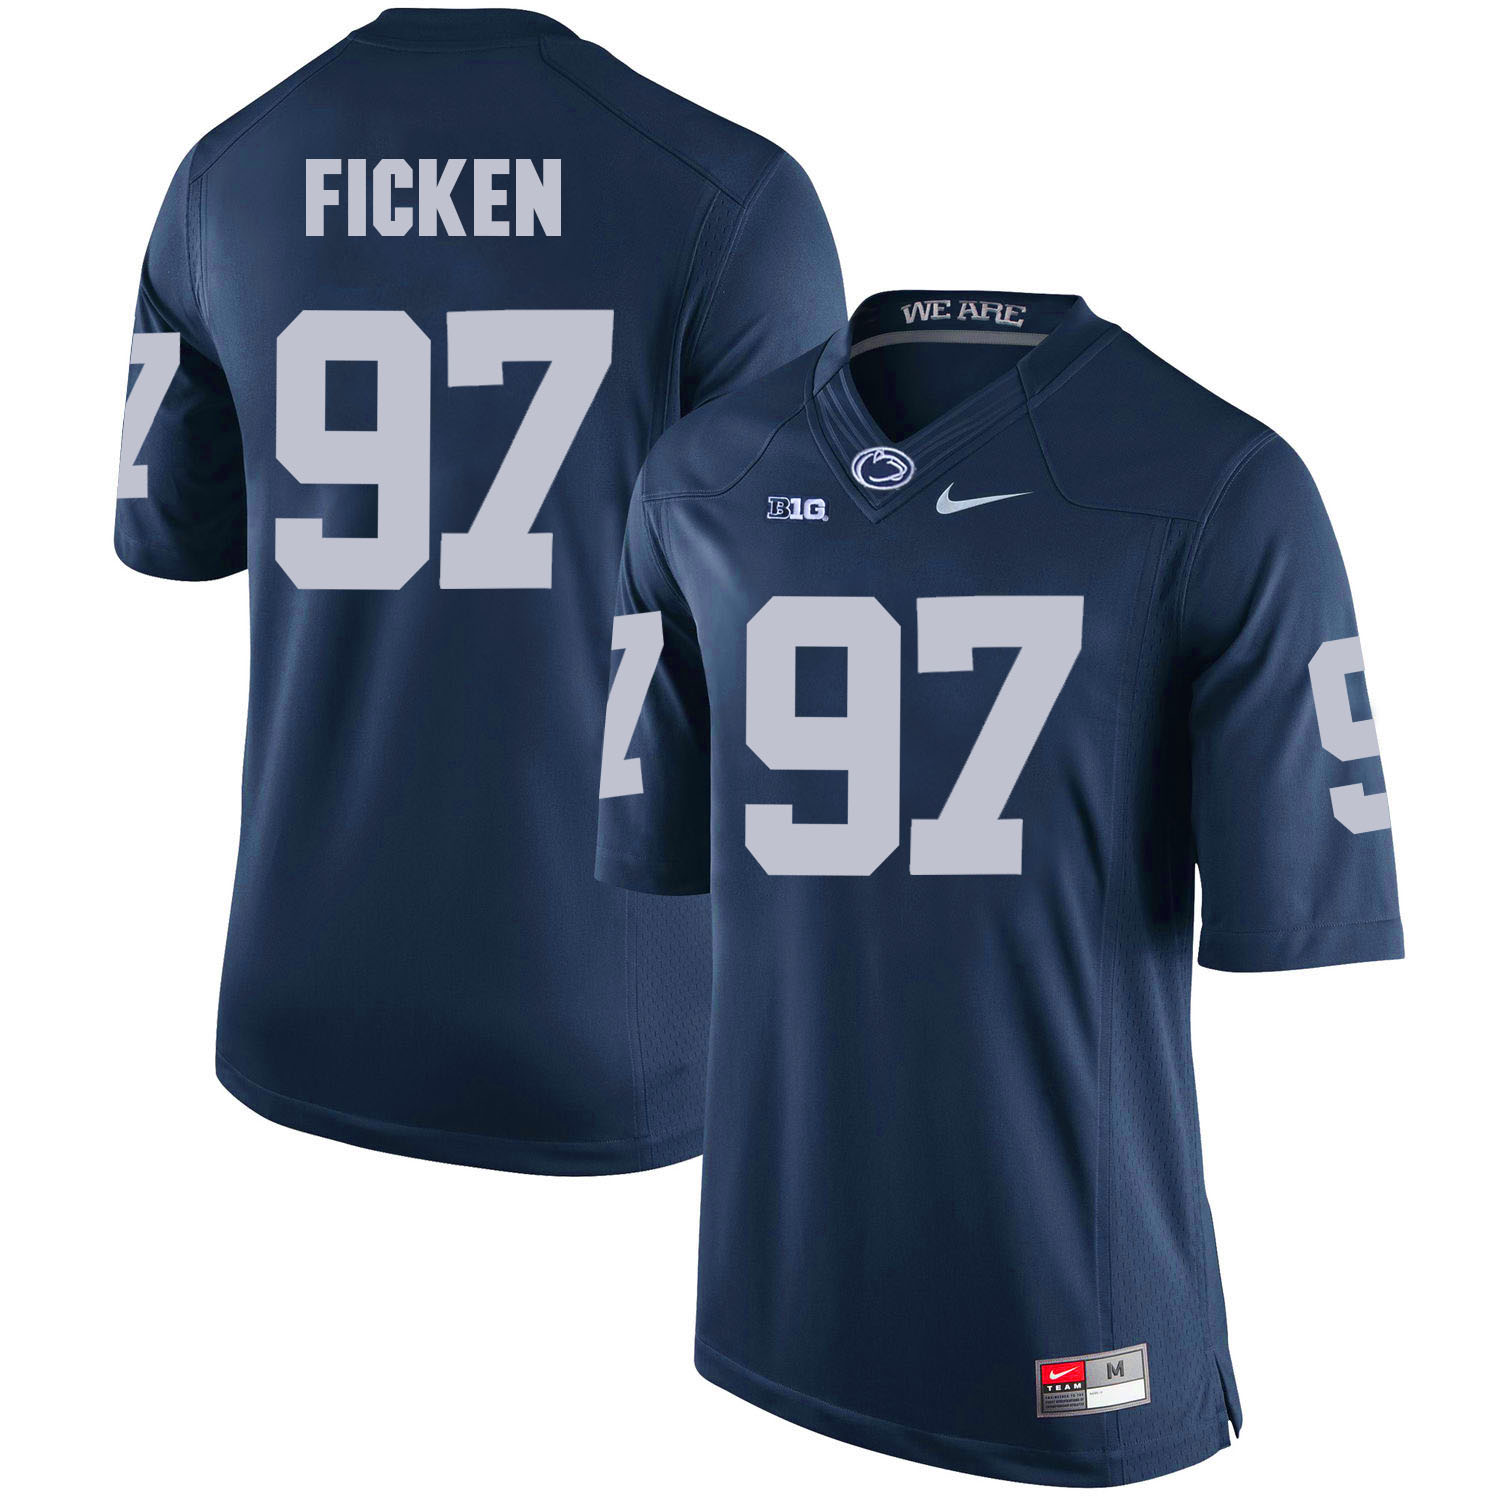 Penn State Nittany Lions 97 Sam Ficken Navy College Football Jersey